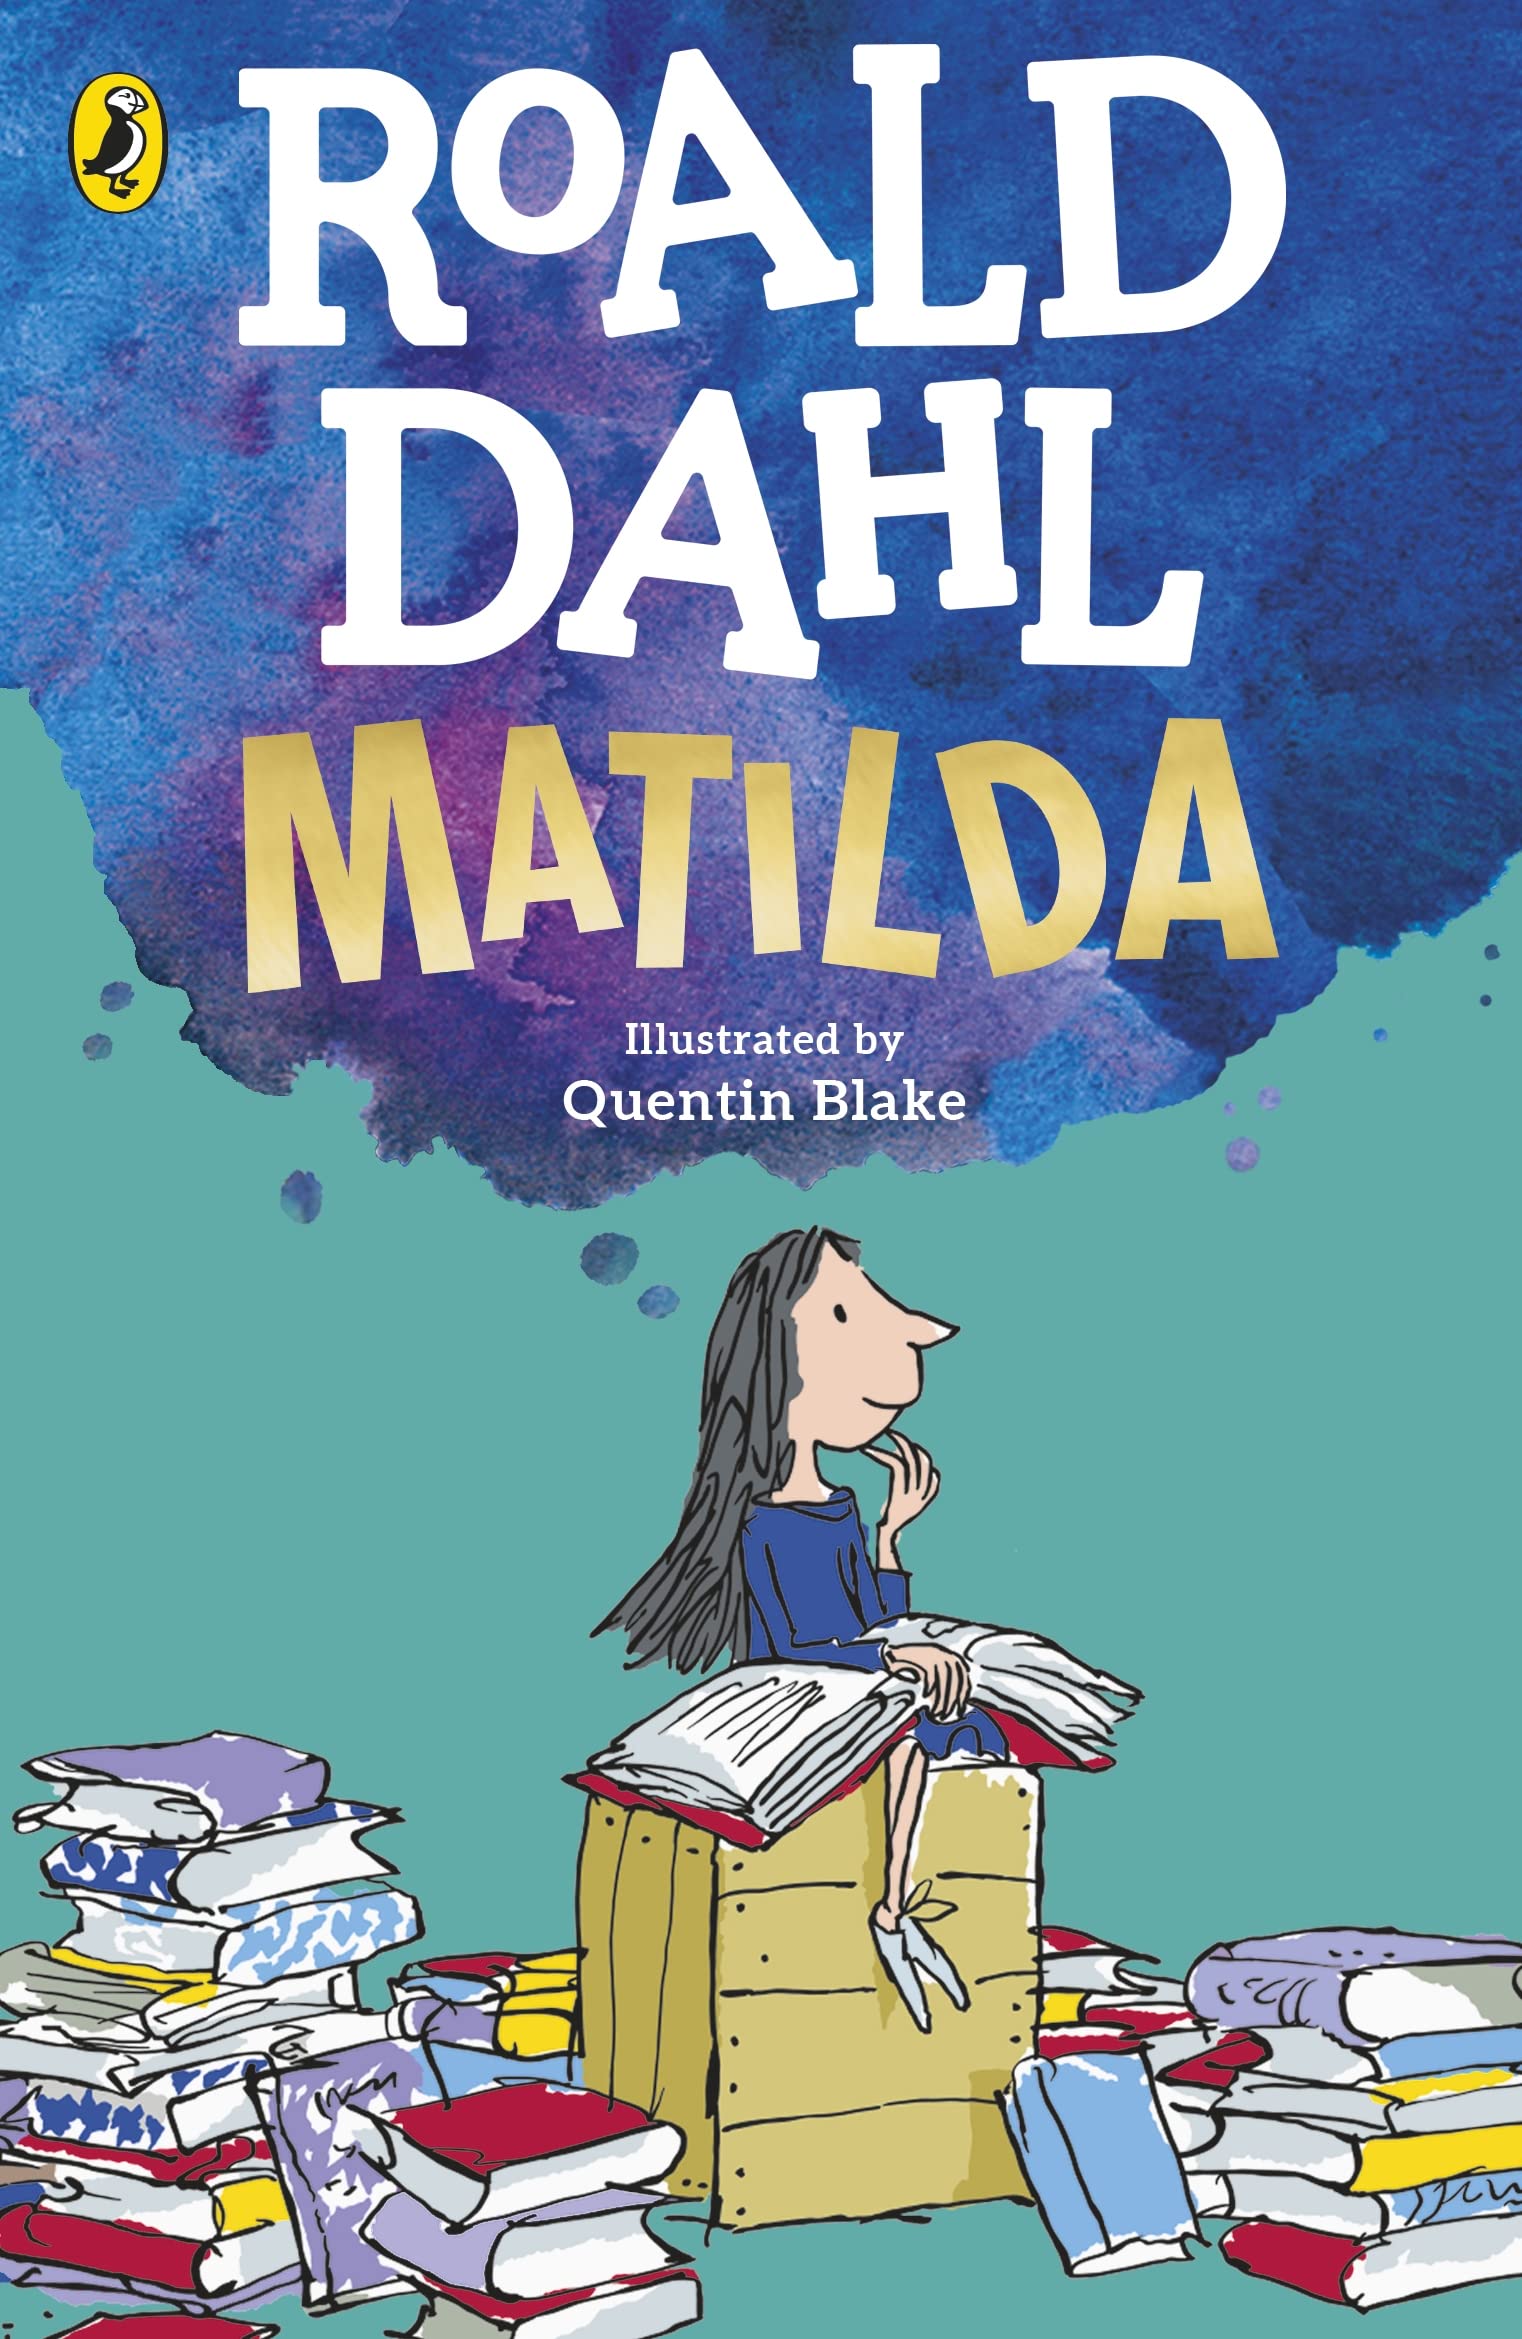 book review on matilda